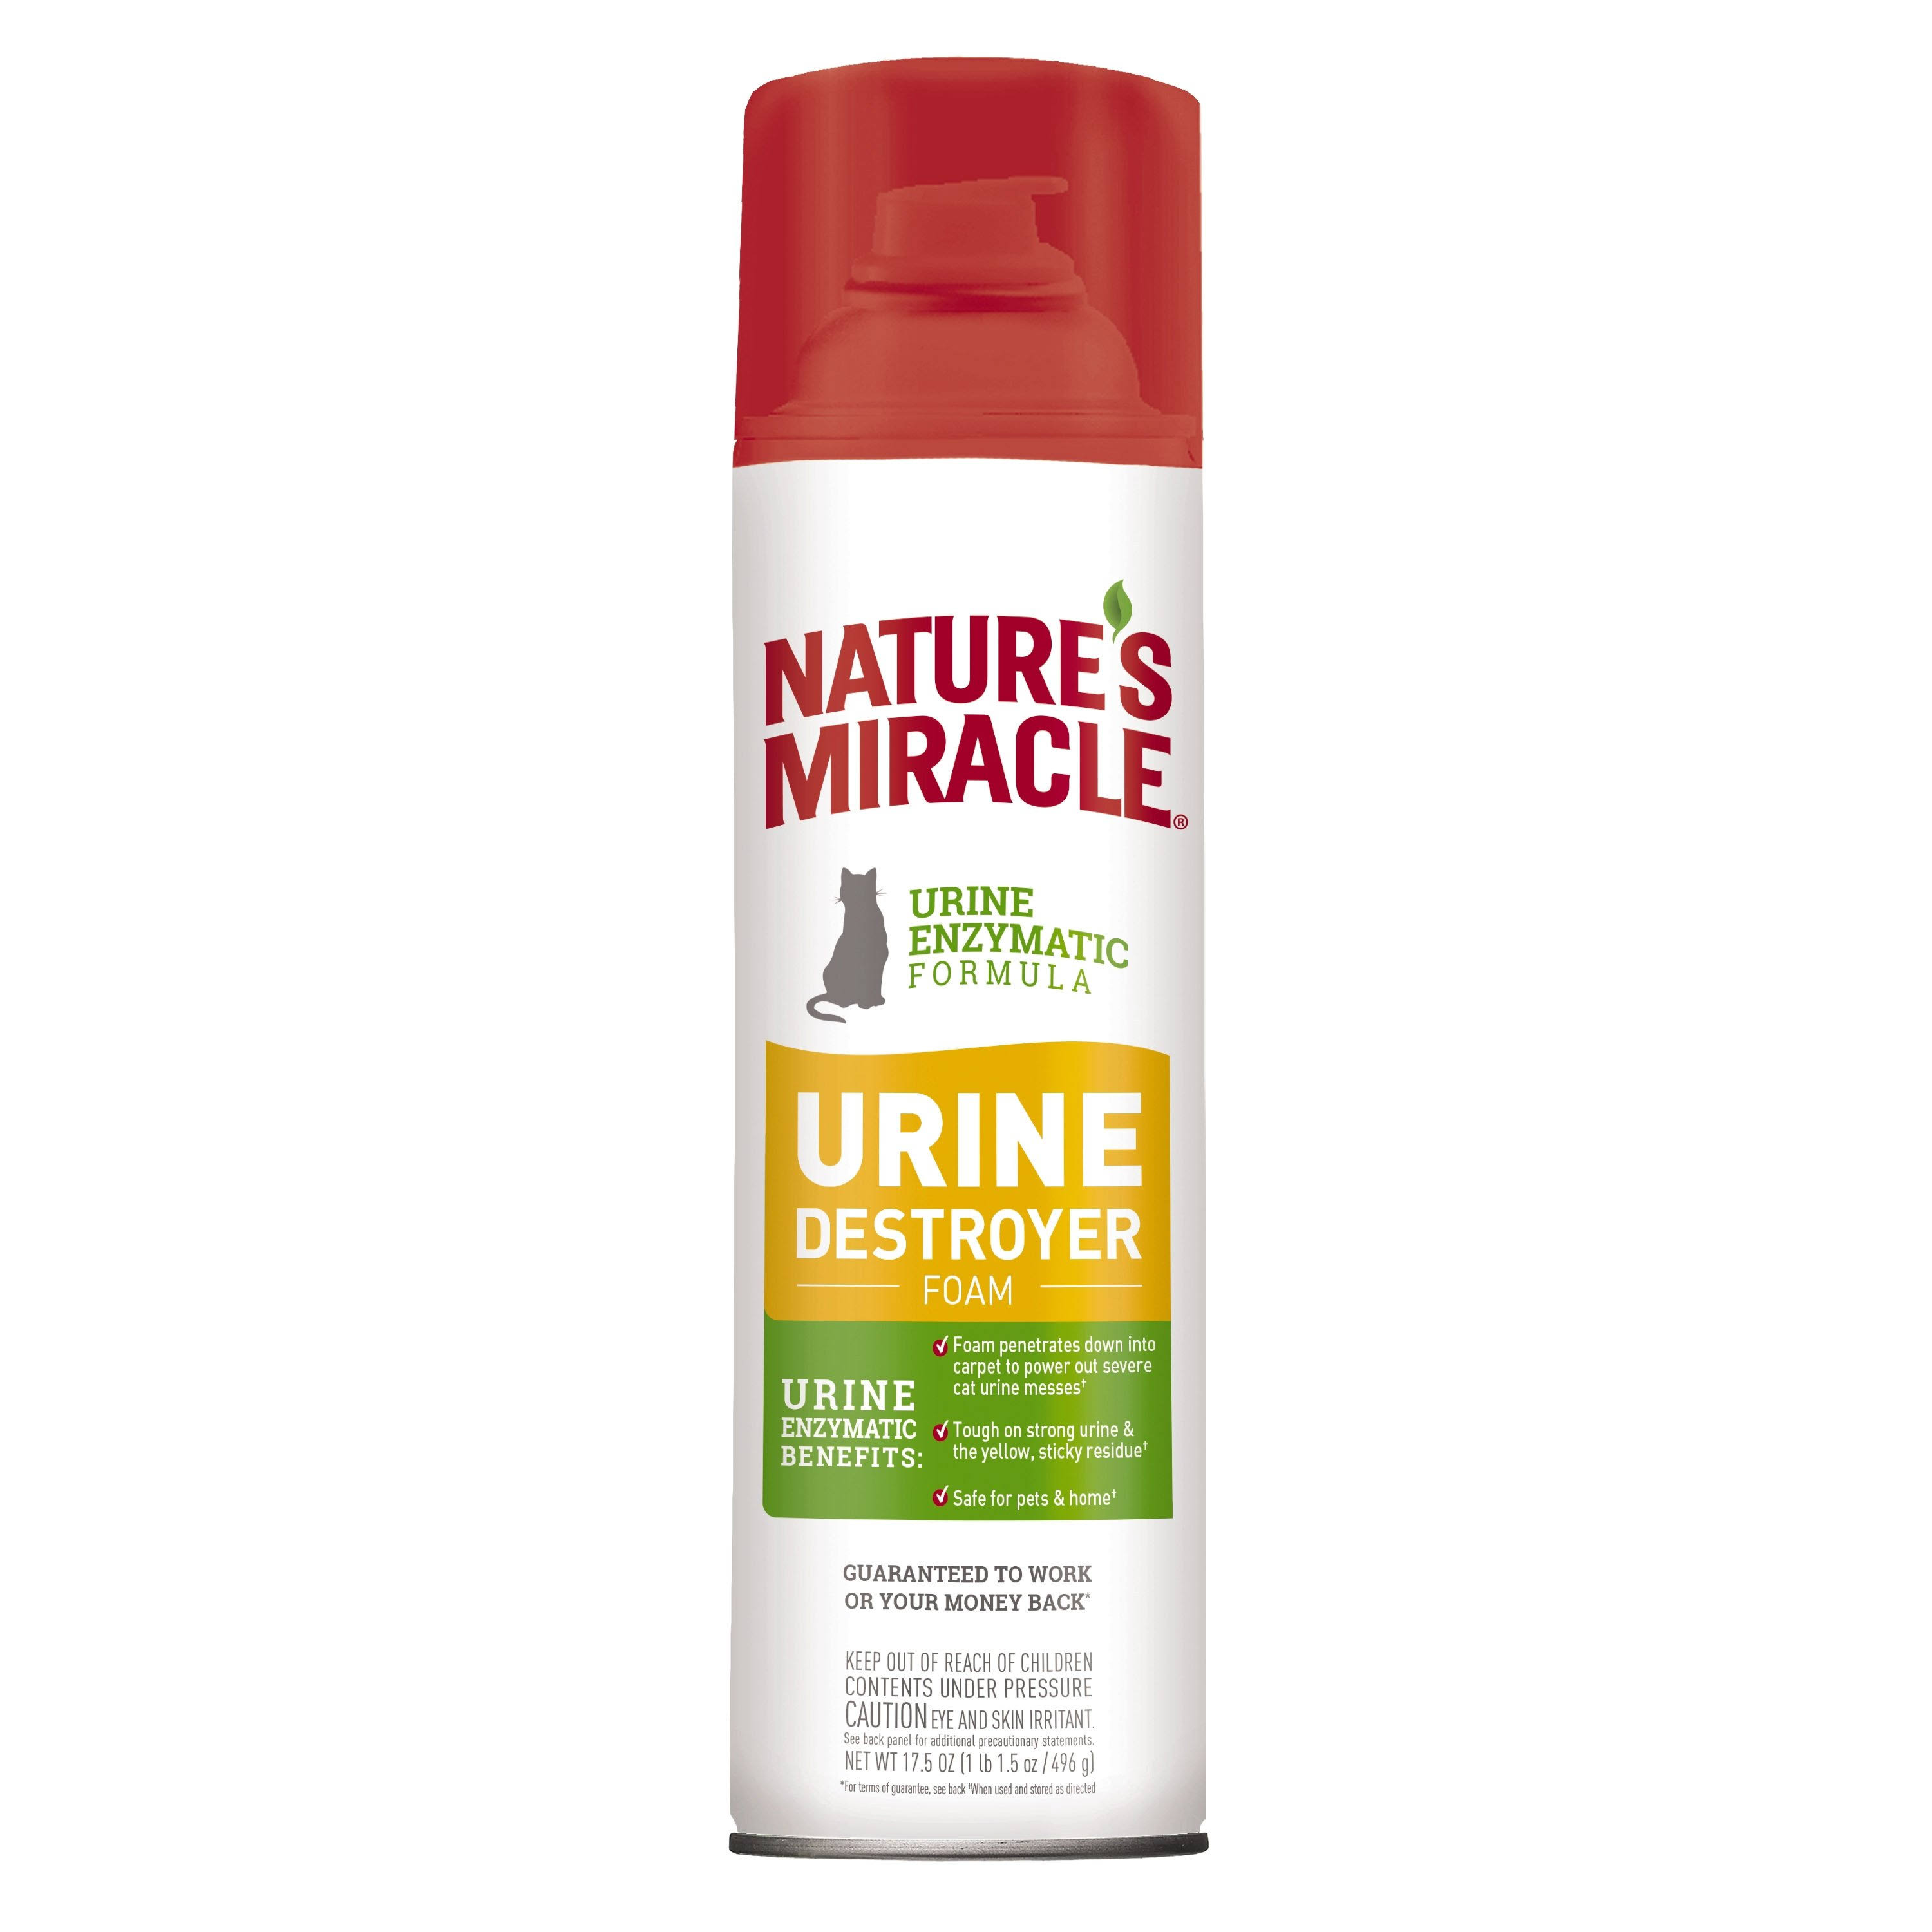 Nature's Miracle Just for Cats Enzymatic Urine Destroyer Foam - 17.5 oz can